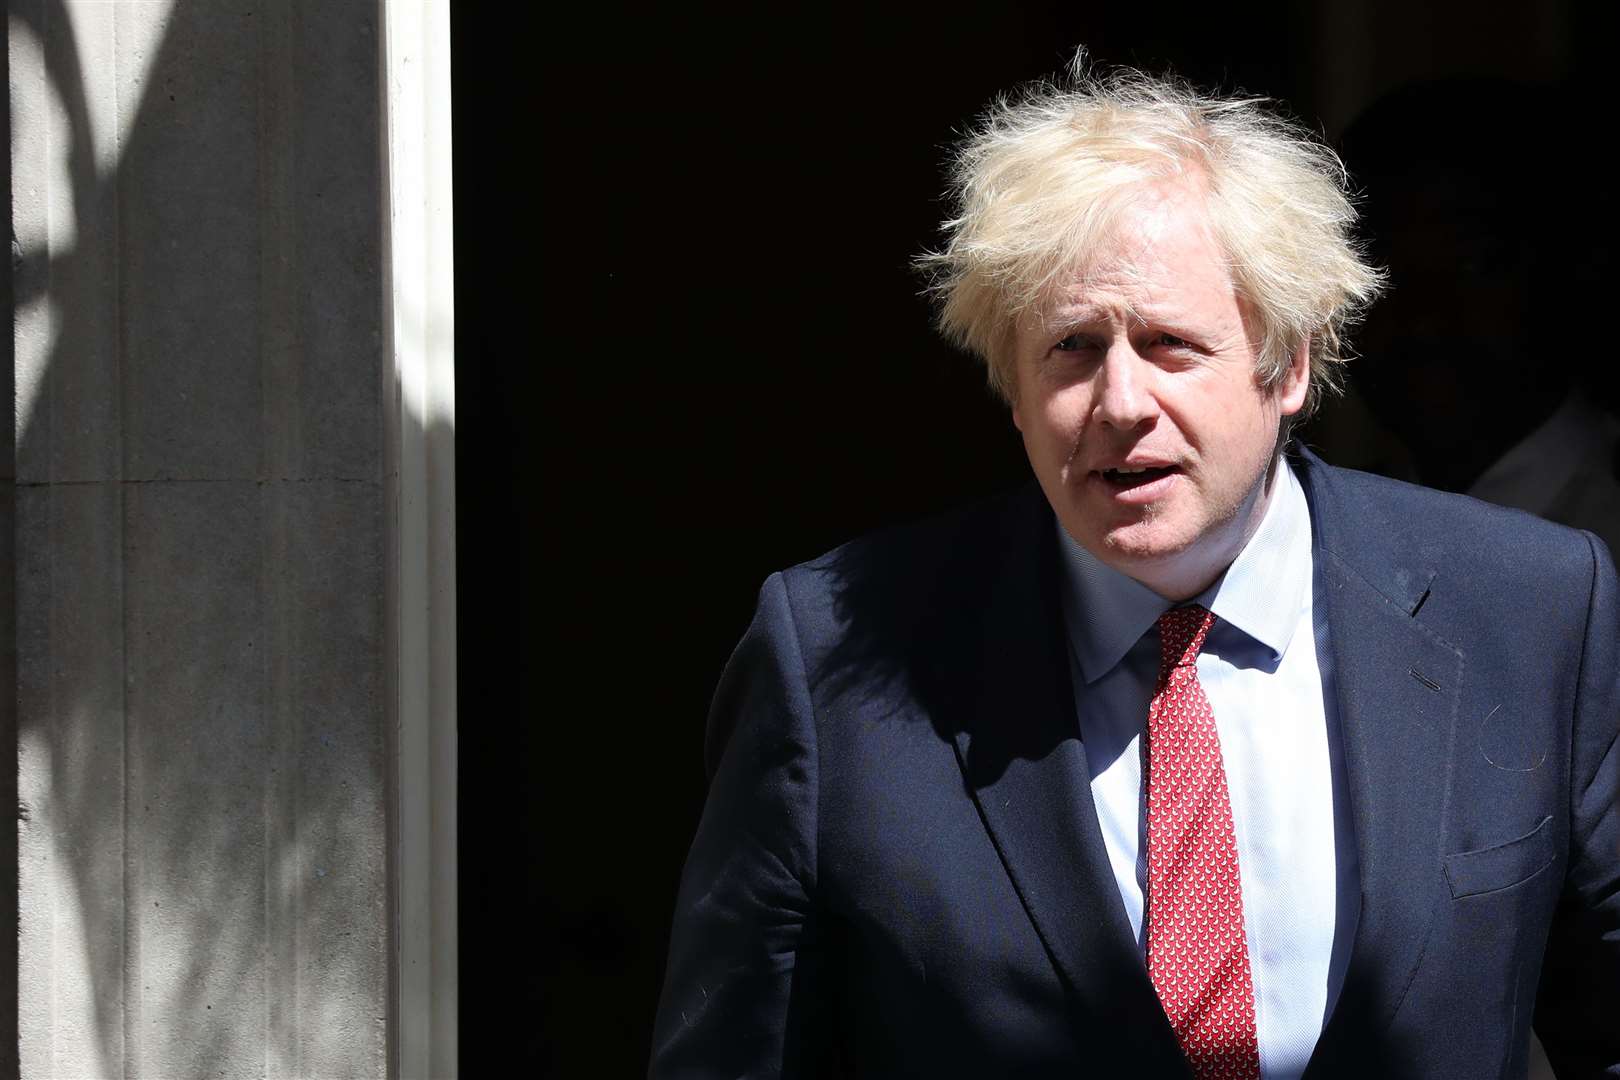 Prime Minister Boris Johnson is under pressure to sack Dominic Cummings after reports he broke the UK Government’s lockdown rules (Jonathan Brady/PA)